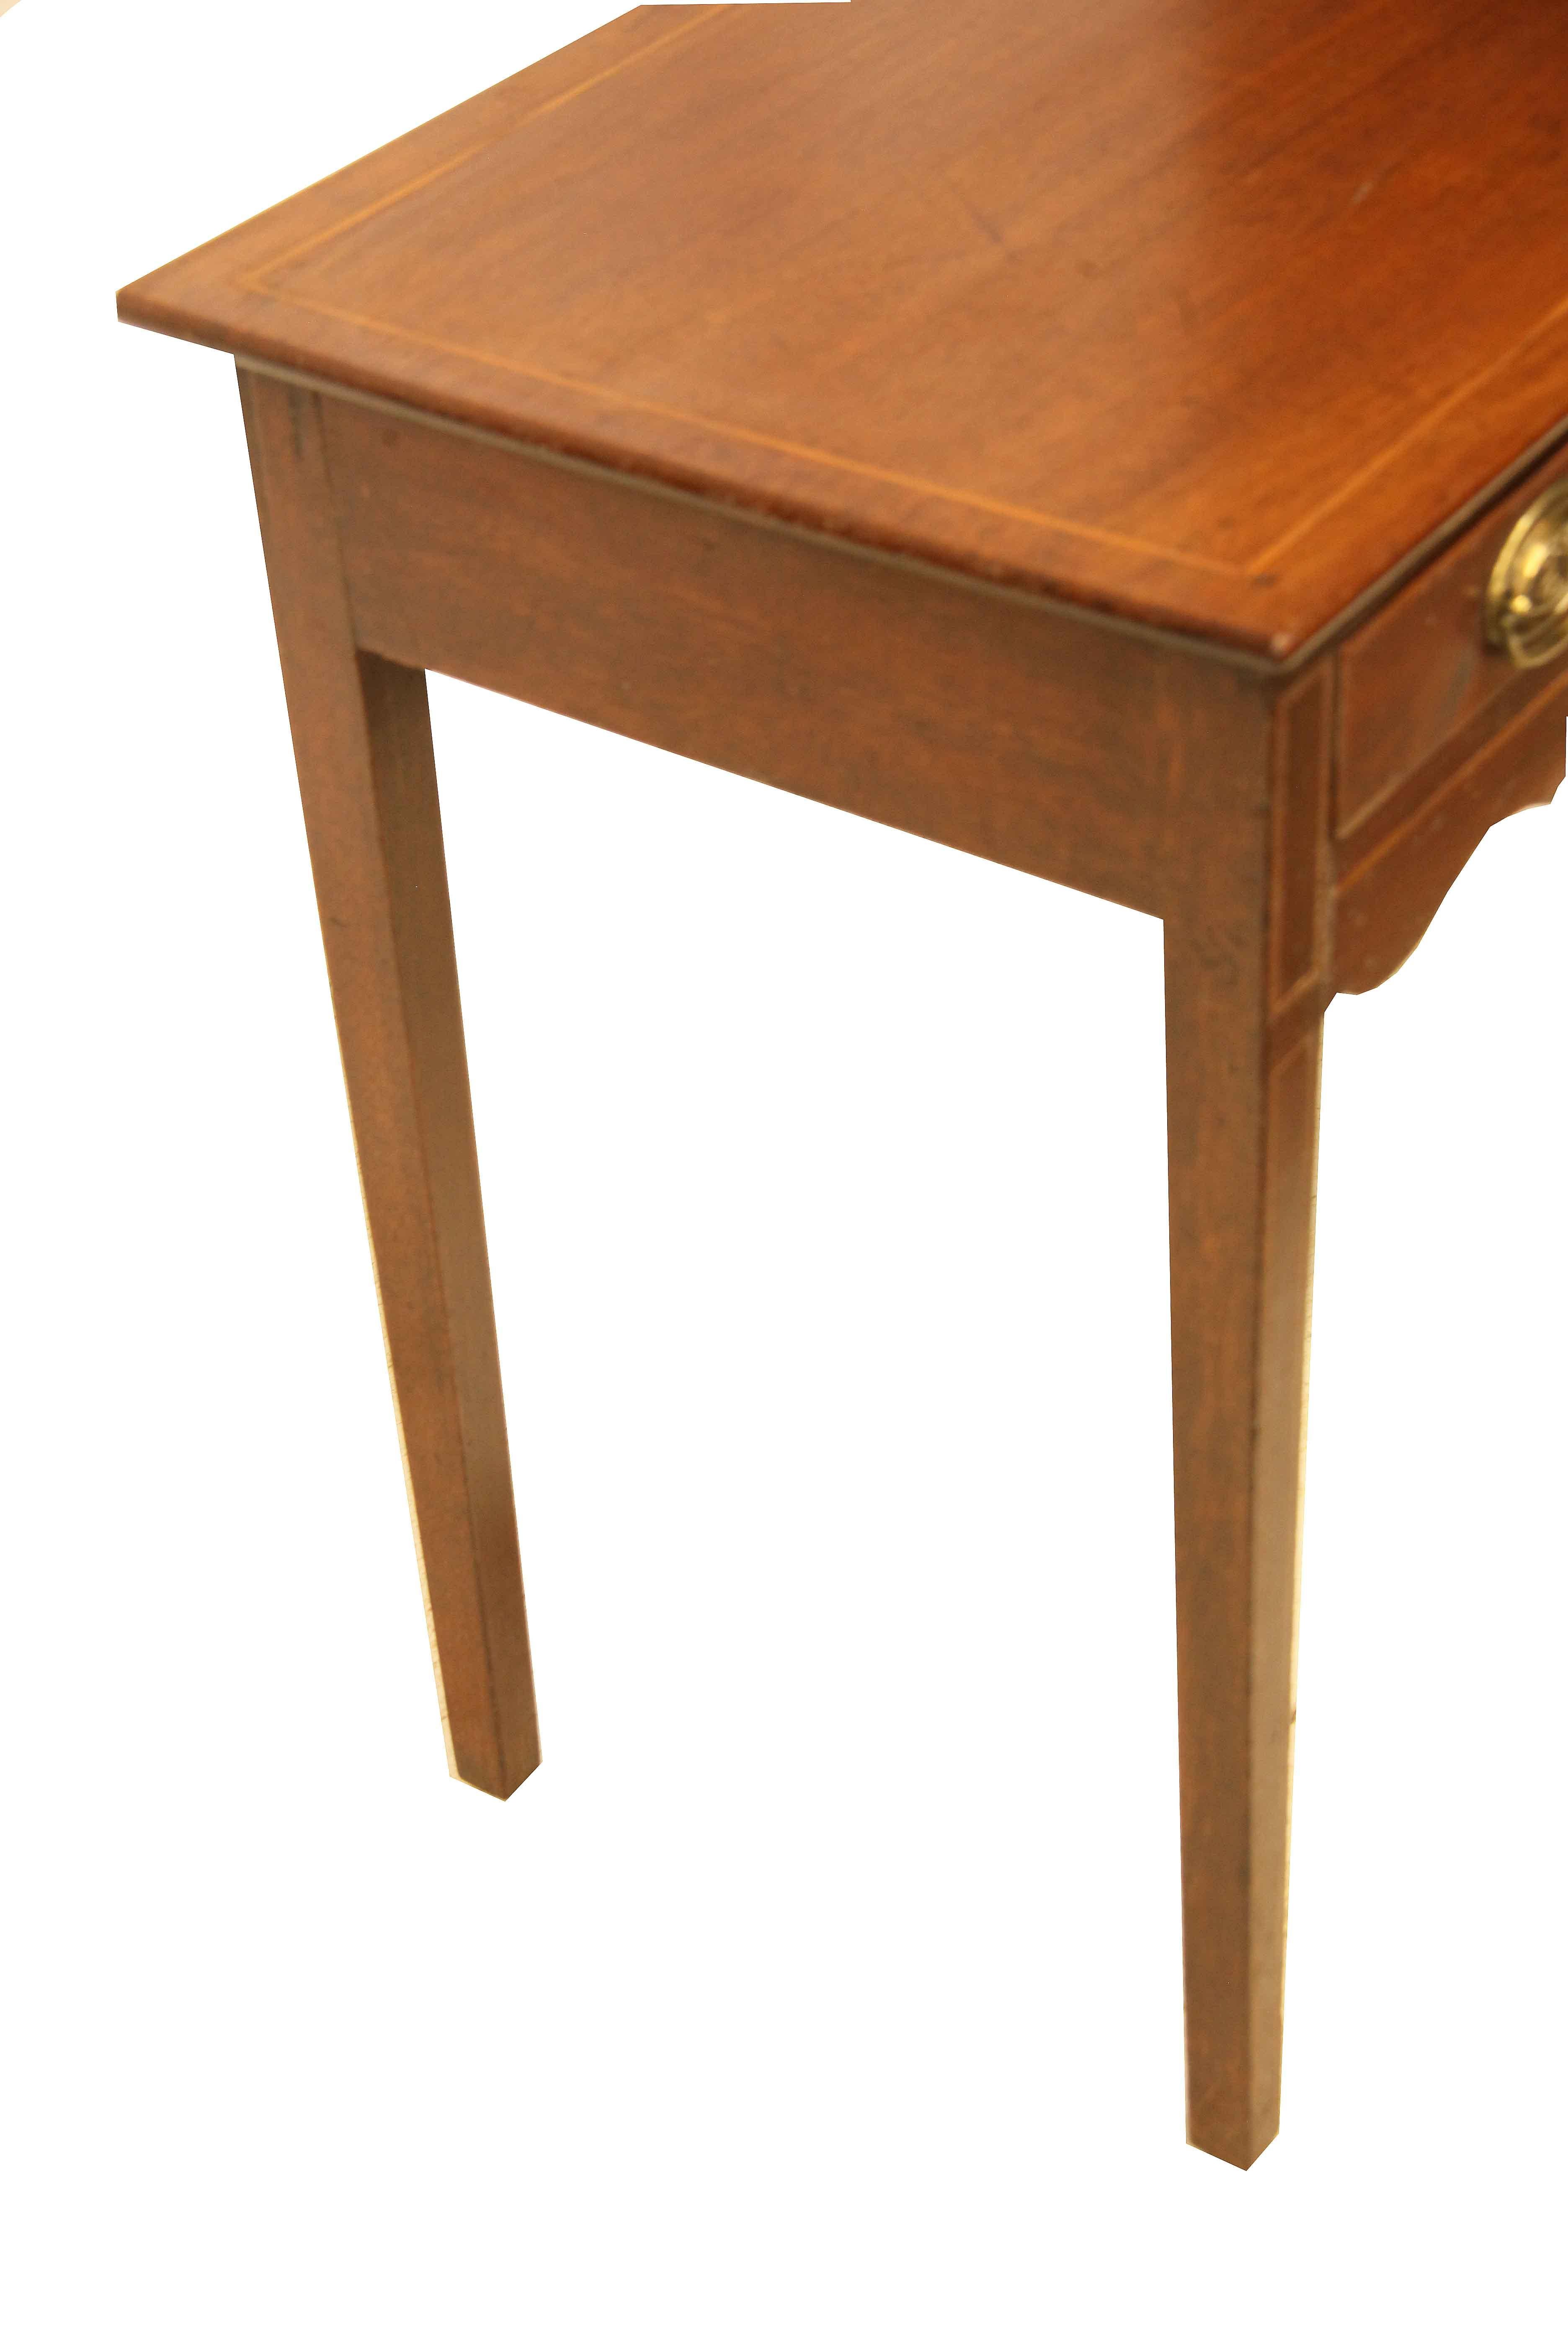 Hepplewhite one drawer table, the top has a beautiful color and patina with the perimeter inlaid with boxwood. The single drawer is also inlaid around the edge. The legs are nicely tapered with the front leg face inlaid with a herringbone pattern